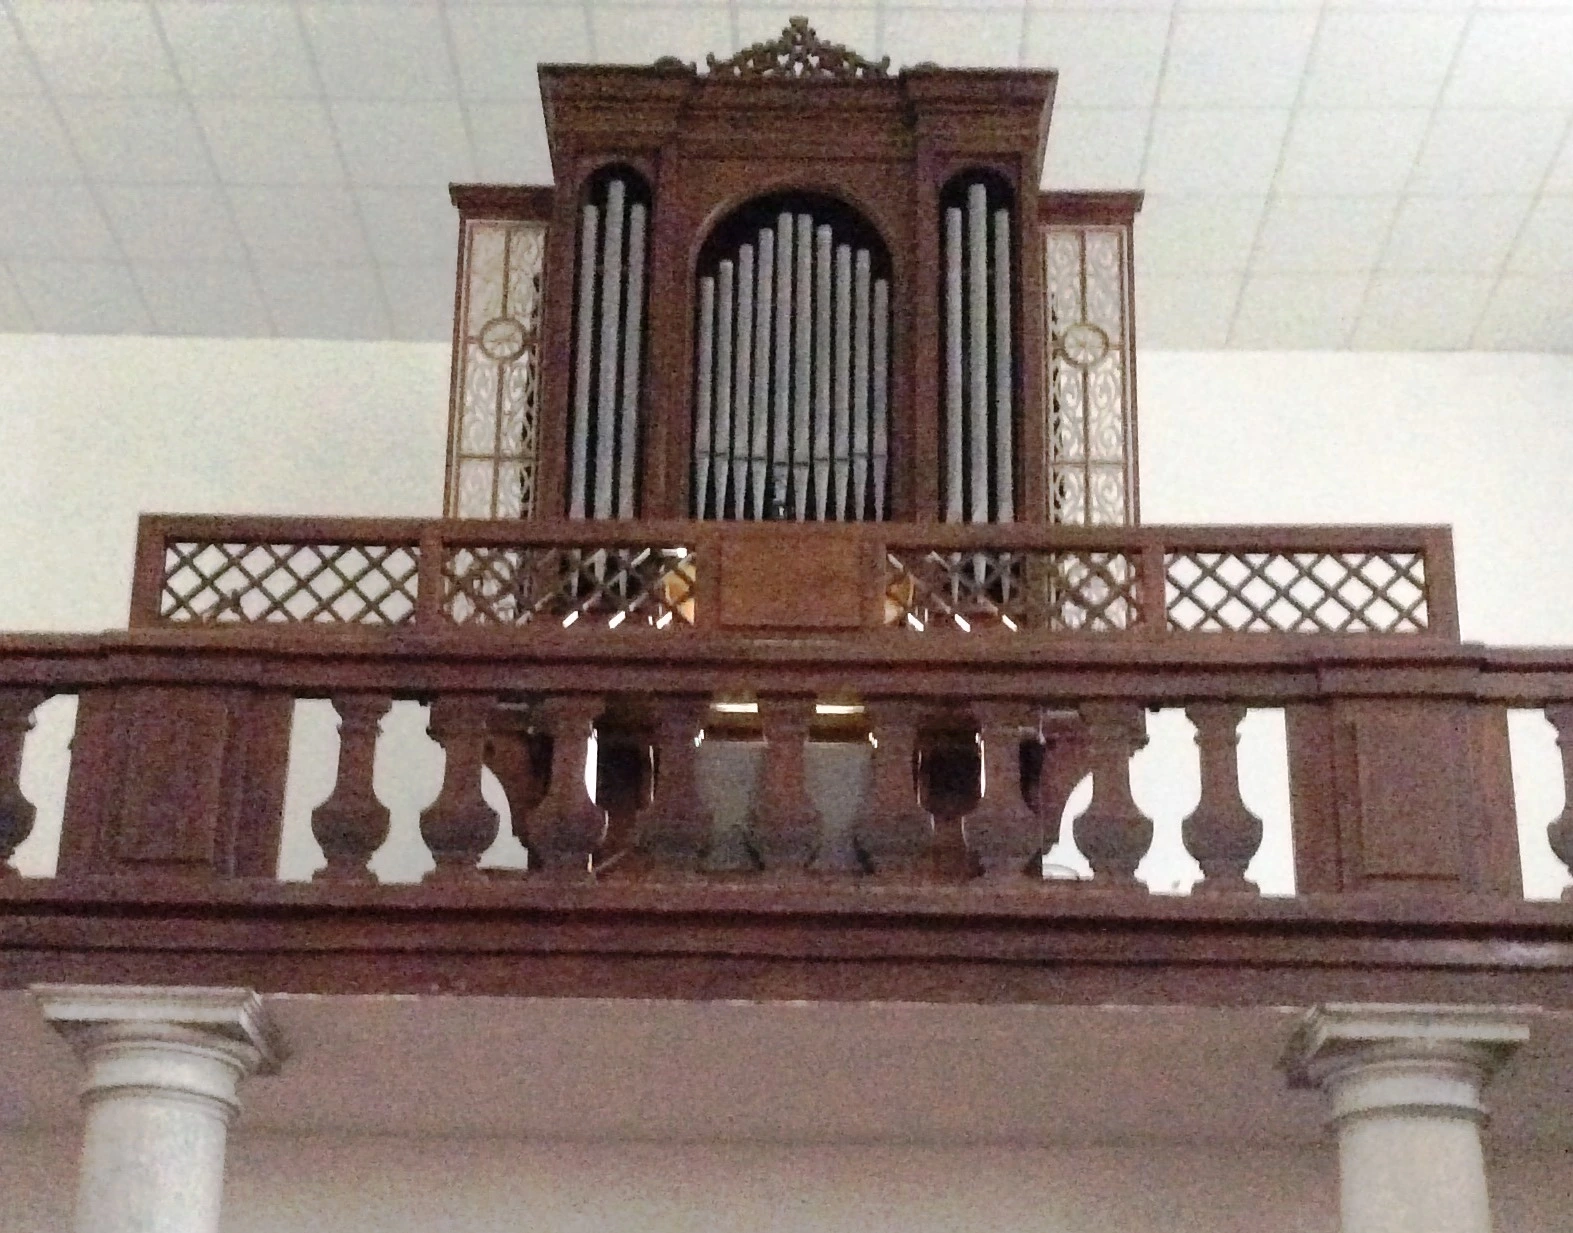 Exemple d'orgue cylindre